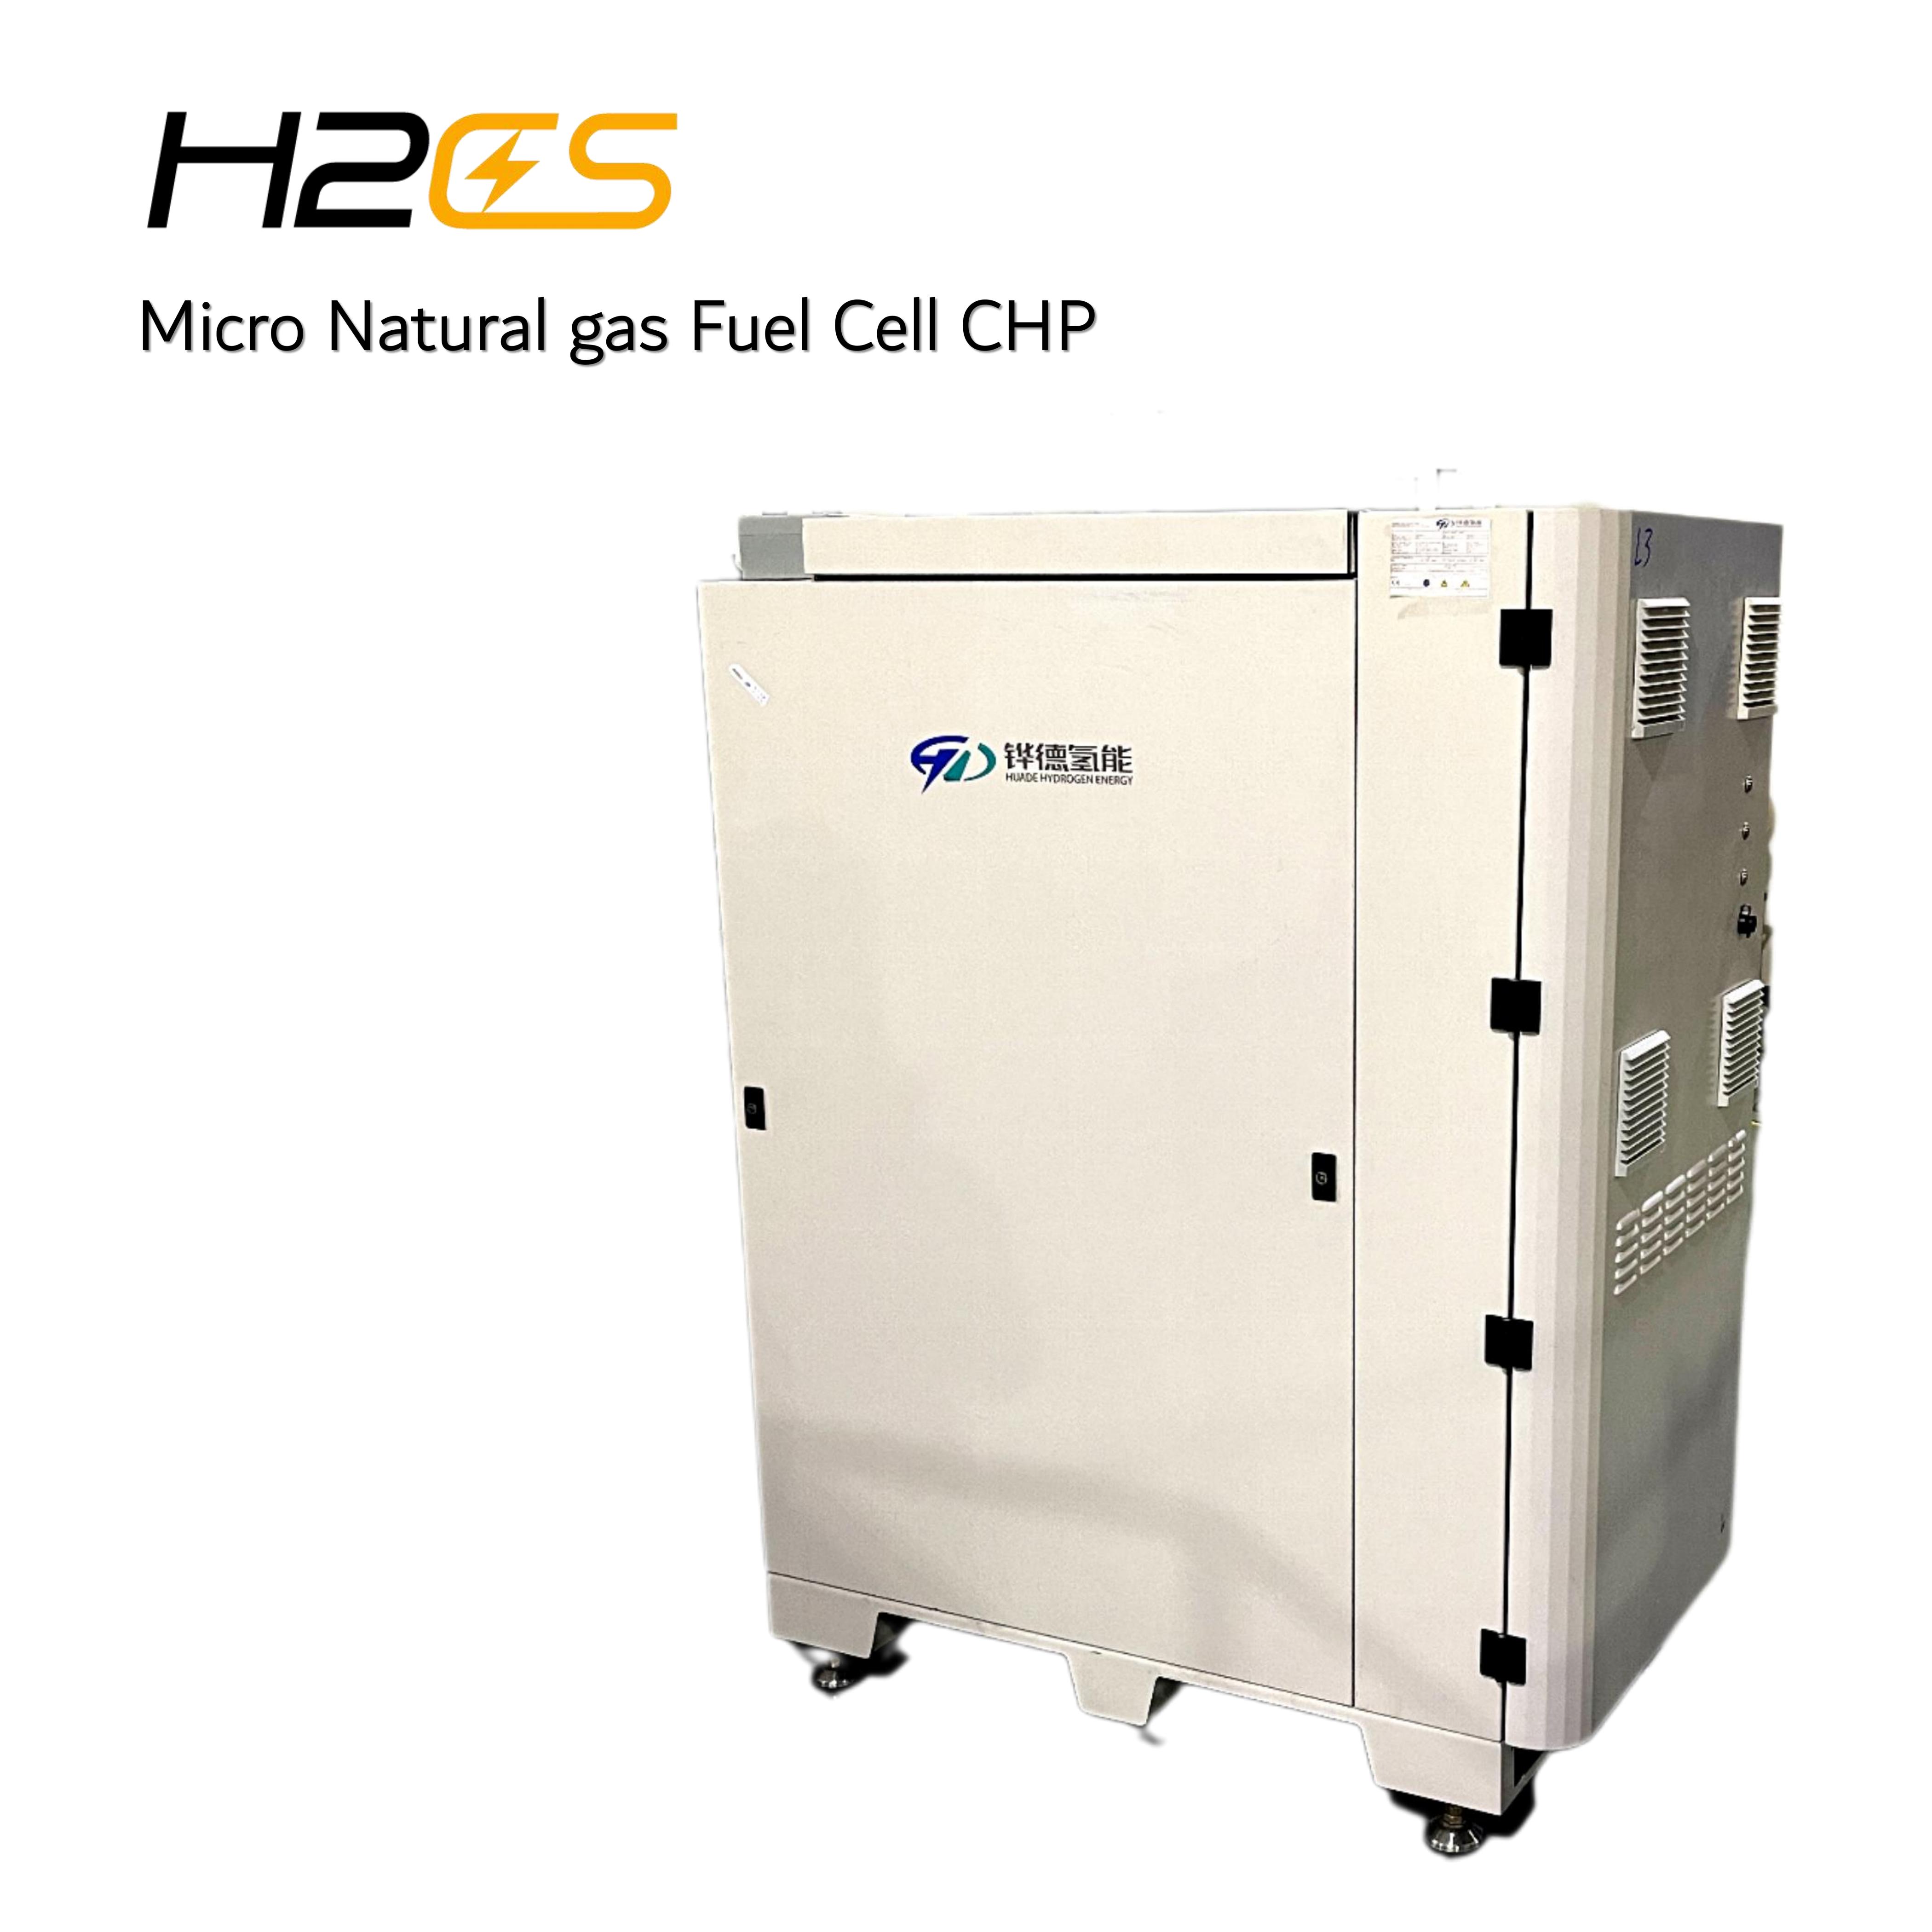 Micro Carbon Free Domestic CHP System